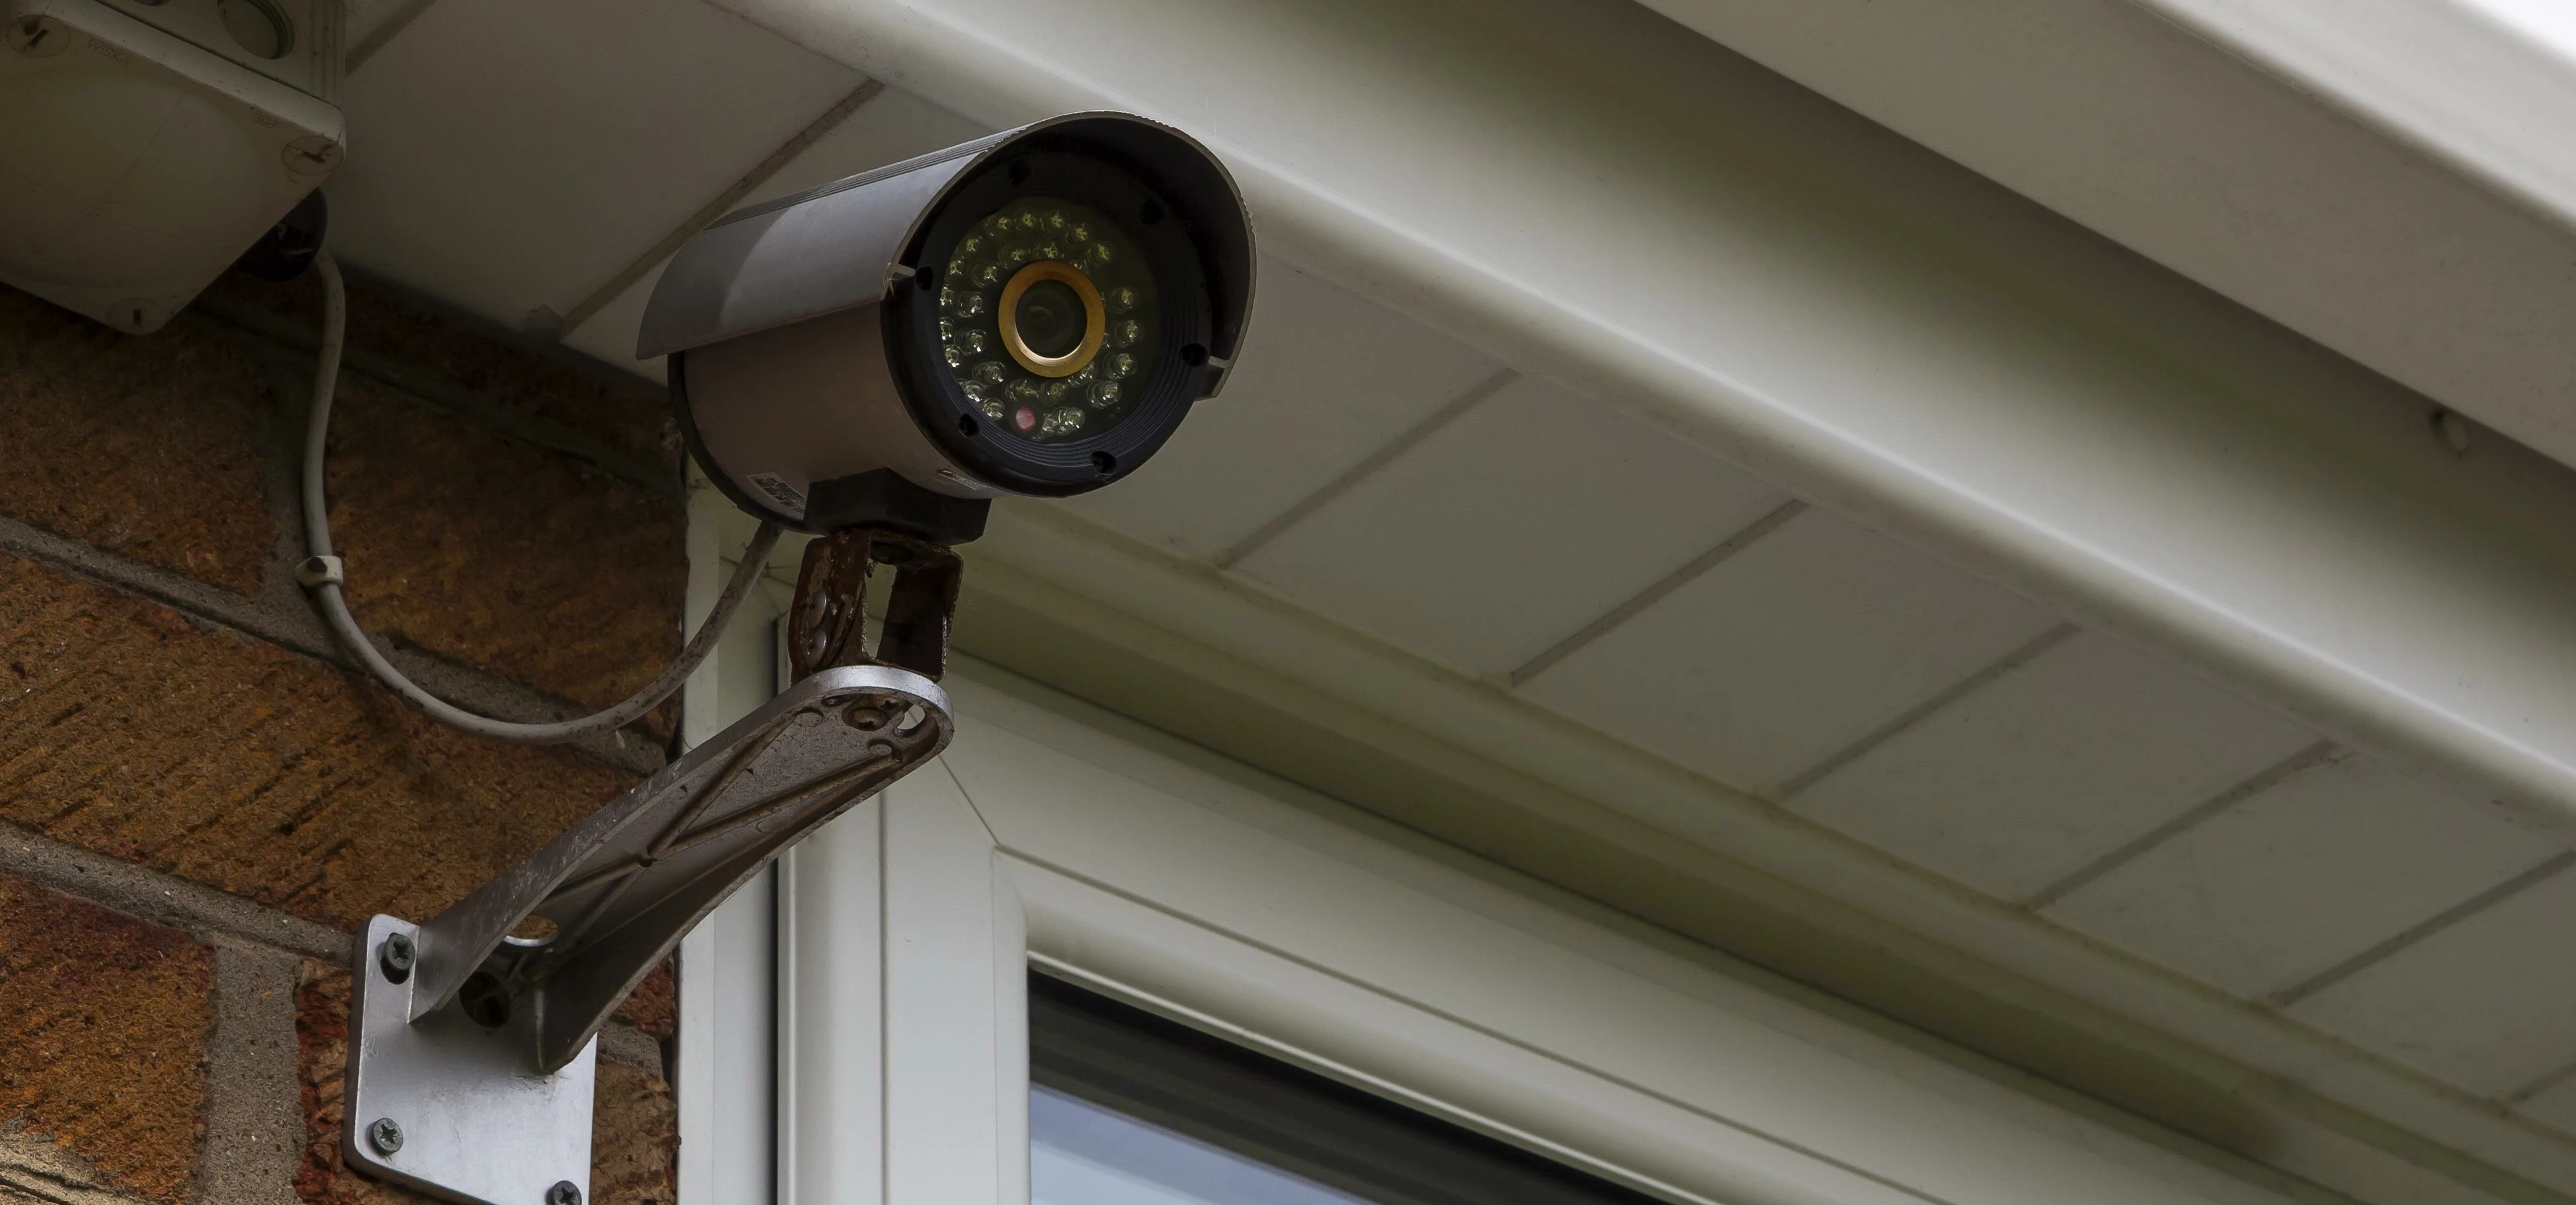 Brits need to protect their homes with high quality security